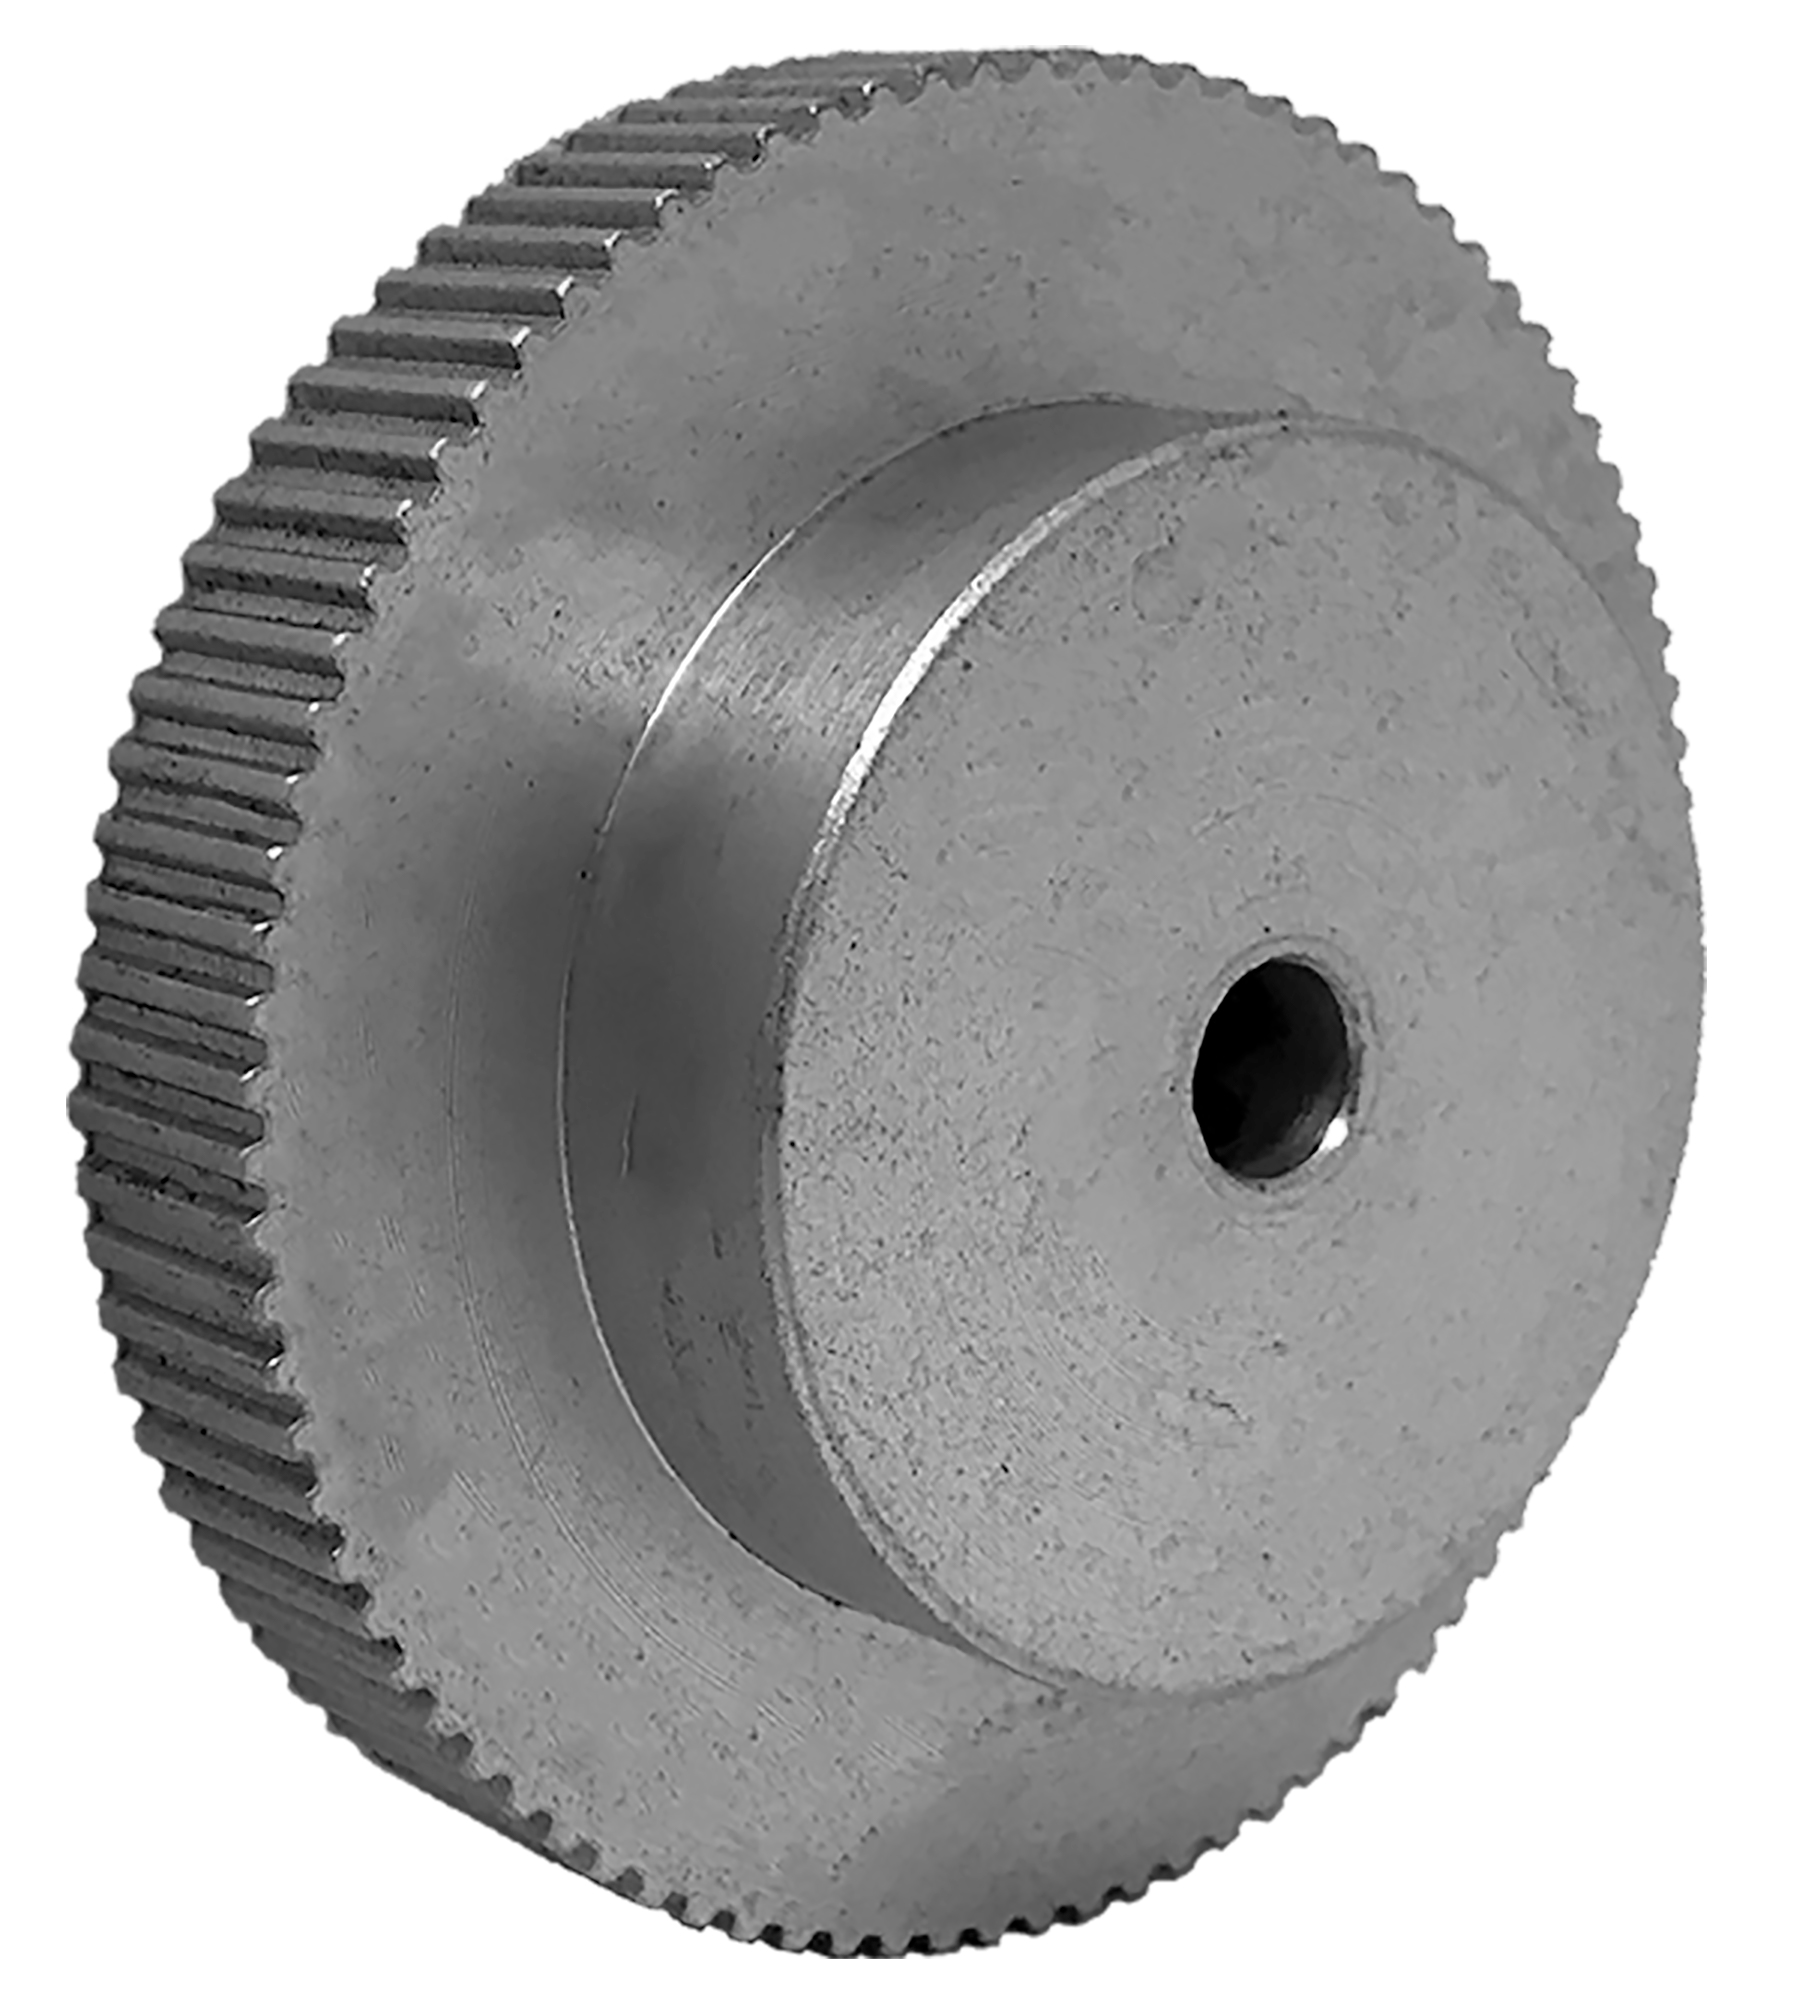 70LT187-6A5 - Aluminum Imperial Pitch Pulleys